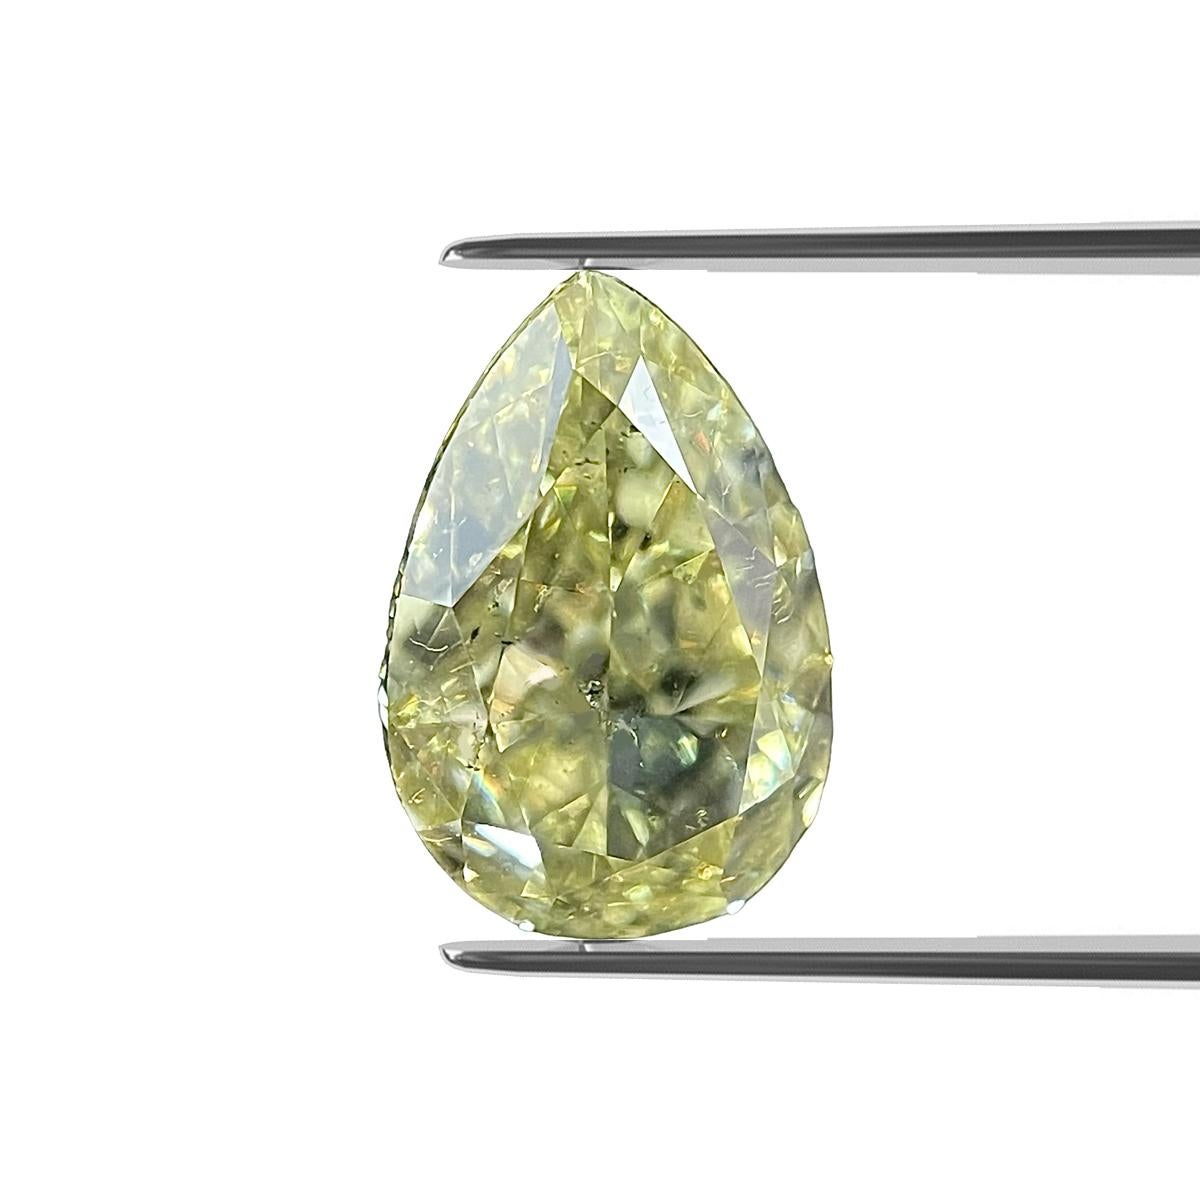 ITEM DESCRIPTION

ID #: NYC56418
Stone Shape: PEAR MODIFIED BRILLIANT
Diamond Weight: 1.00ct
Clarity: SI2
Color: Fancy yellow
Cut:	Excellent
Measurements: 7.77 x 5.26 x 3.33 mm
Symmetry: Excellent
Polish: Excellent
Fluorescence: None
Certifying Lab: